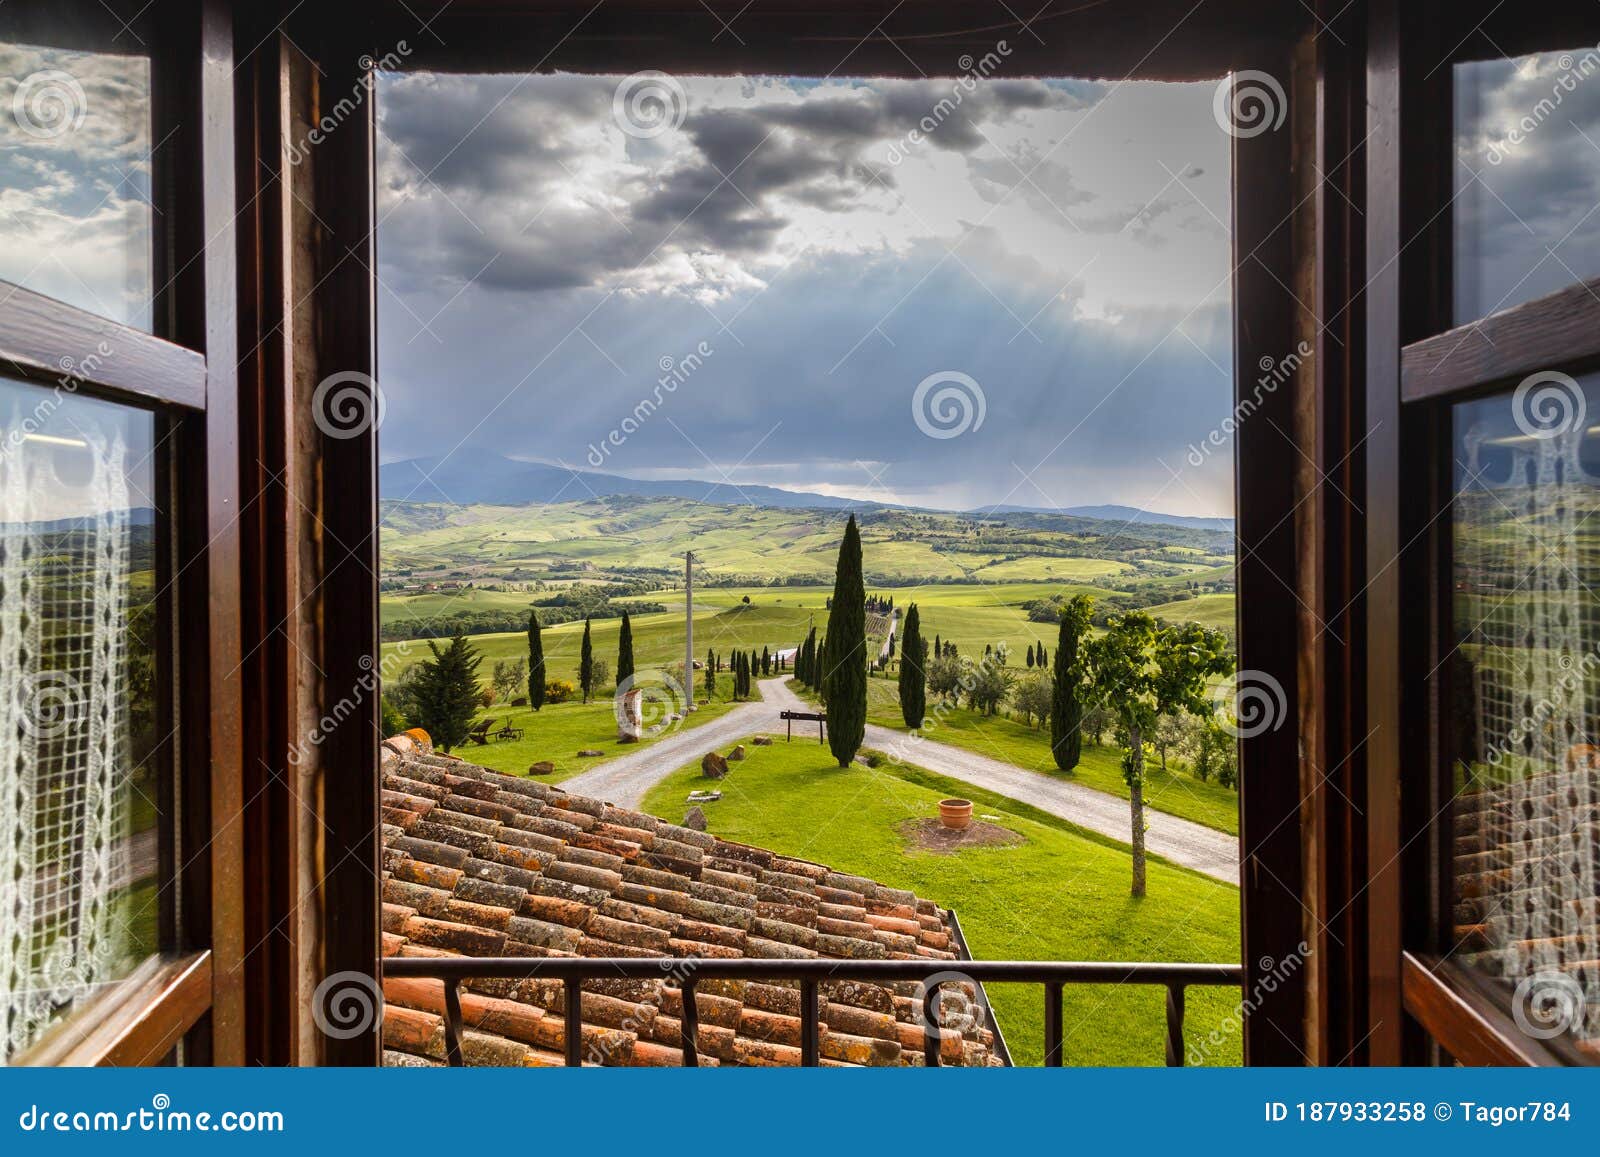 Rural Outdoor Door Curtain Italian Country House Hills Village Panorama on Mountains Meadow Tuscany Landscape Borders Insulated with Grommet Curtains for Bedroom 108x108 INCH,Multicolor